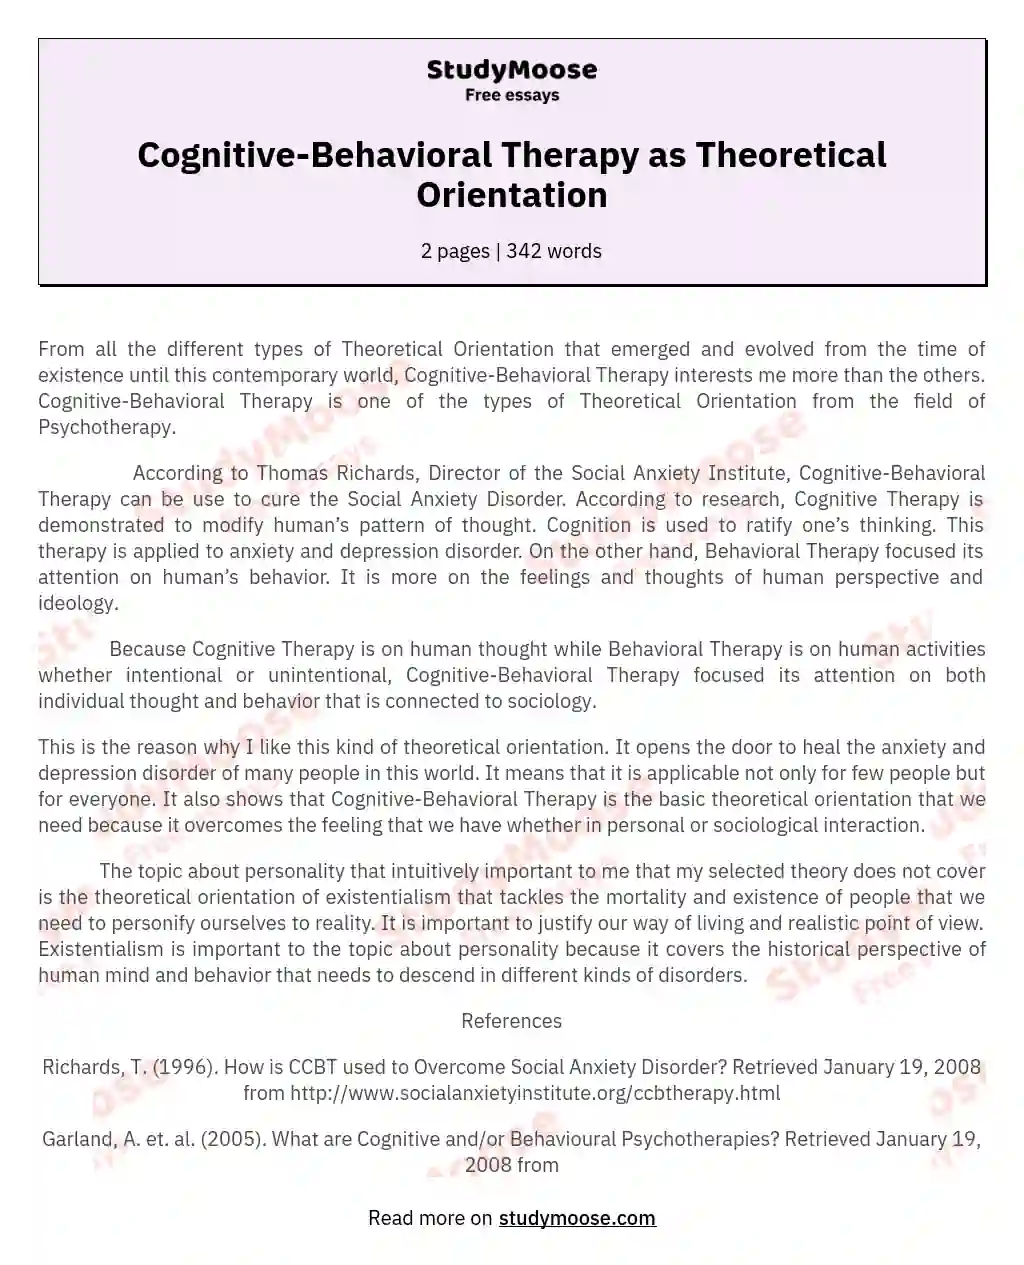 Cognitive-Behavioral Therapy as Theoretical Orientation